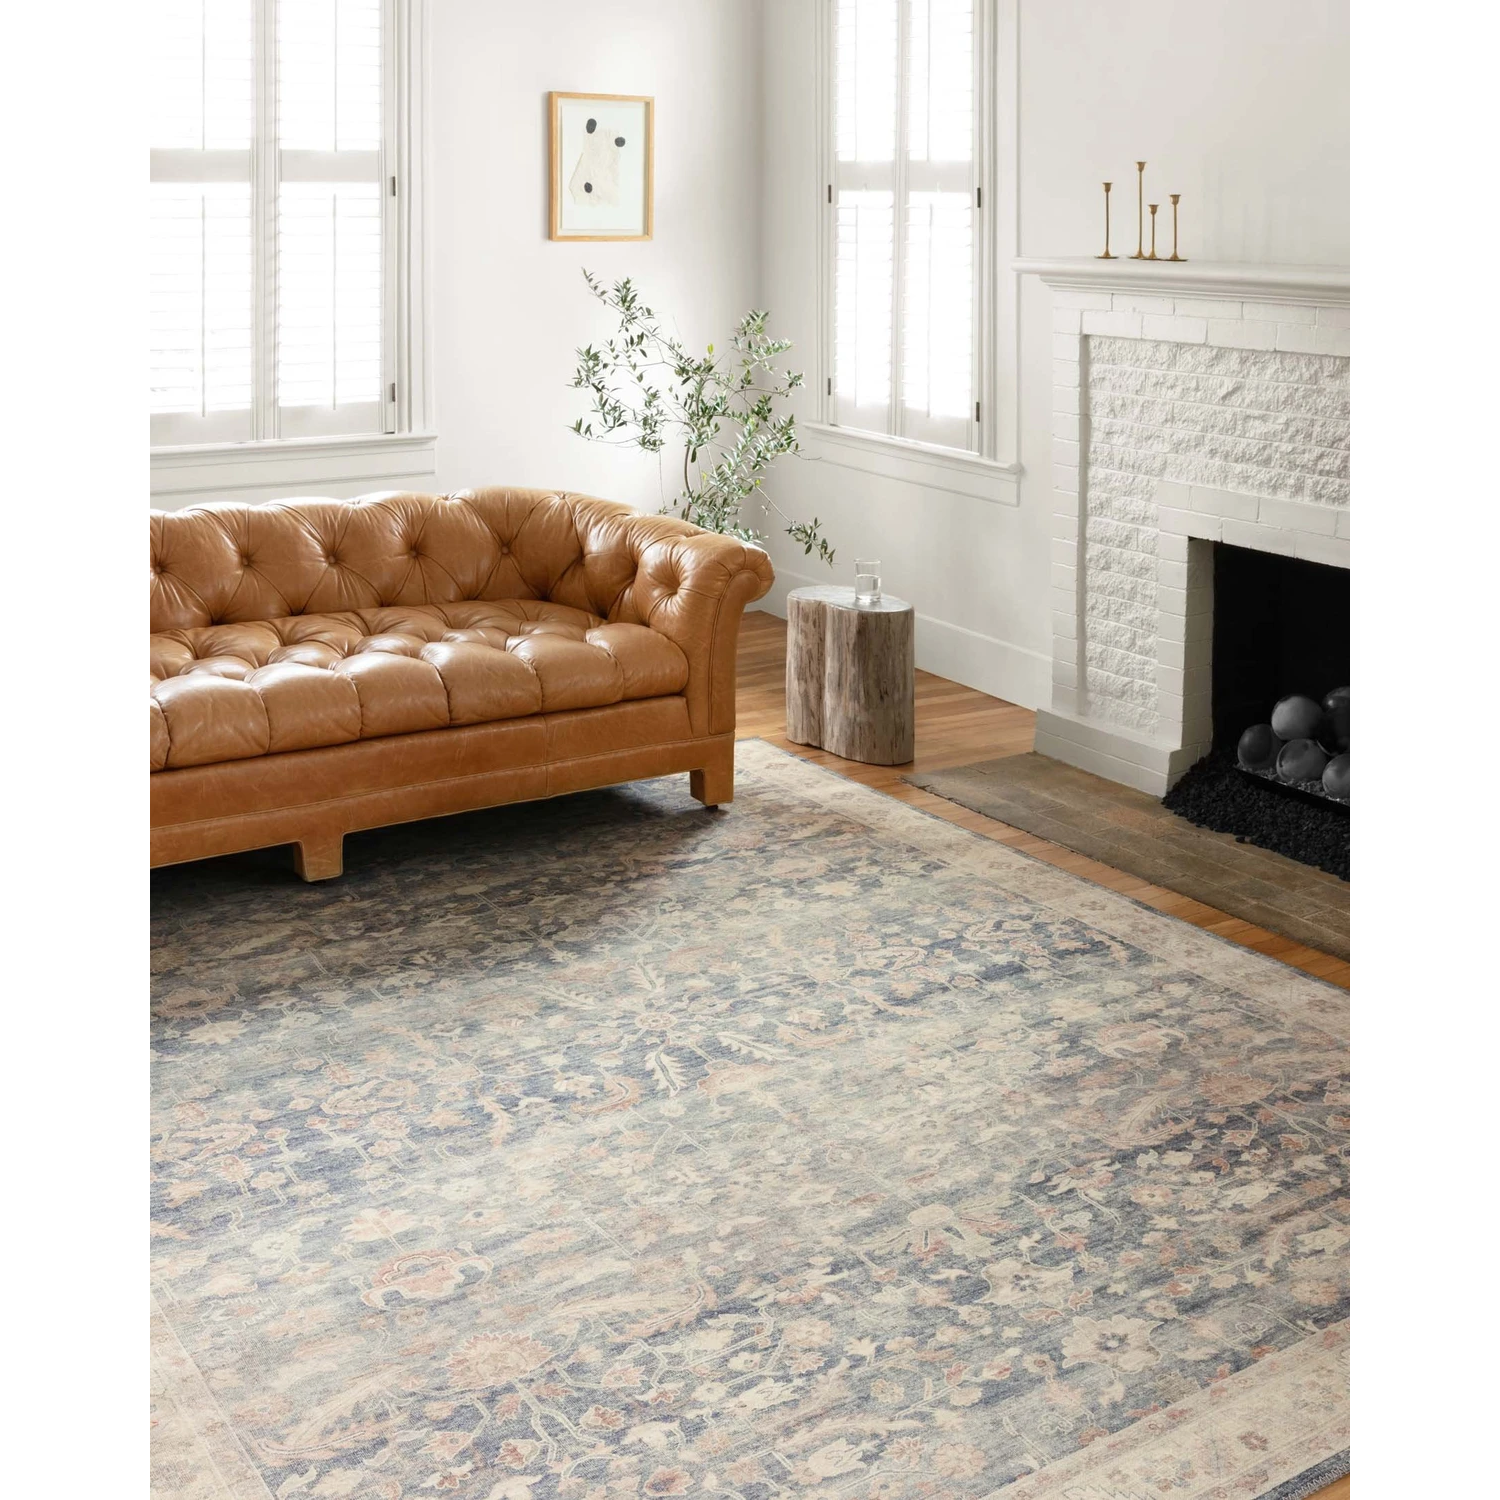 Hathaway Rug by Loloi - HTH-02 Denim/Multi-Loloi Rugs-Blue Hand Home